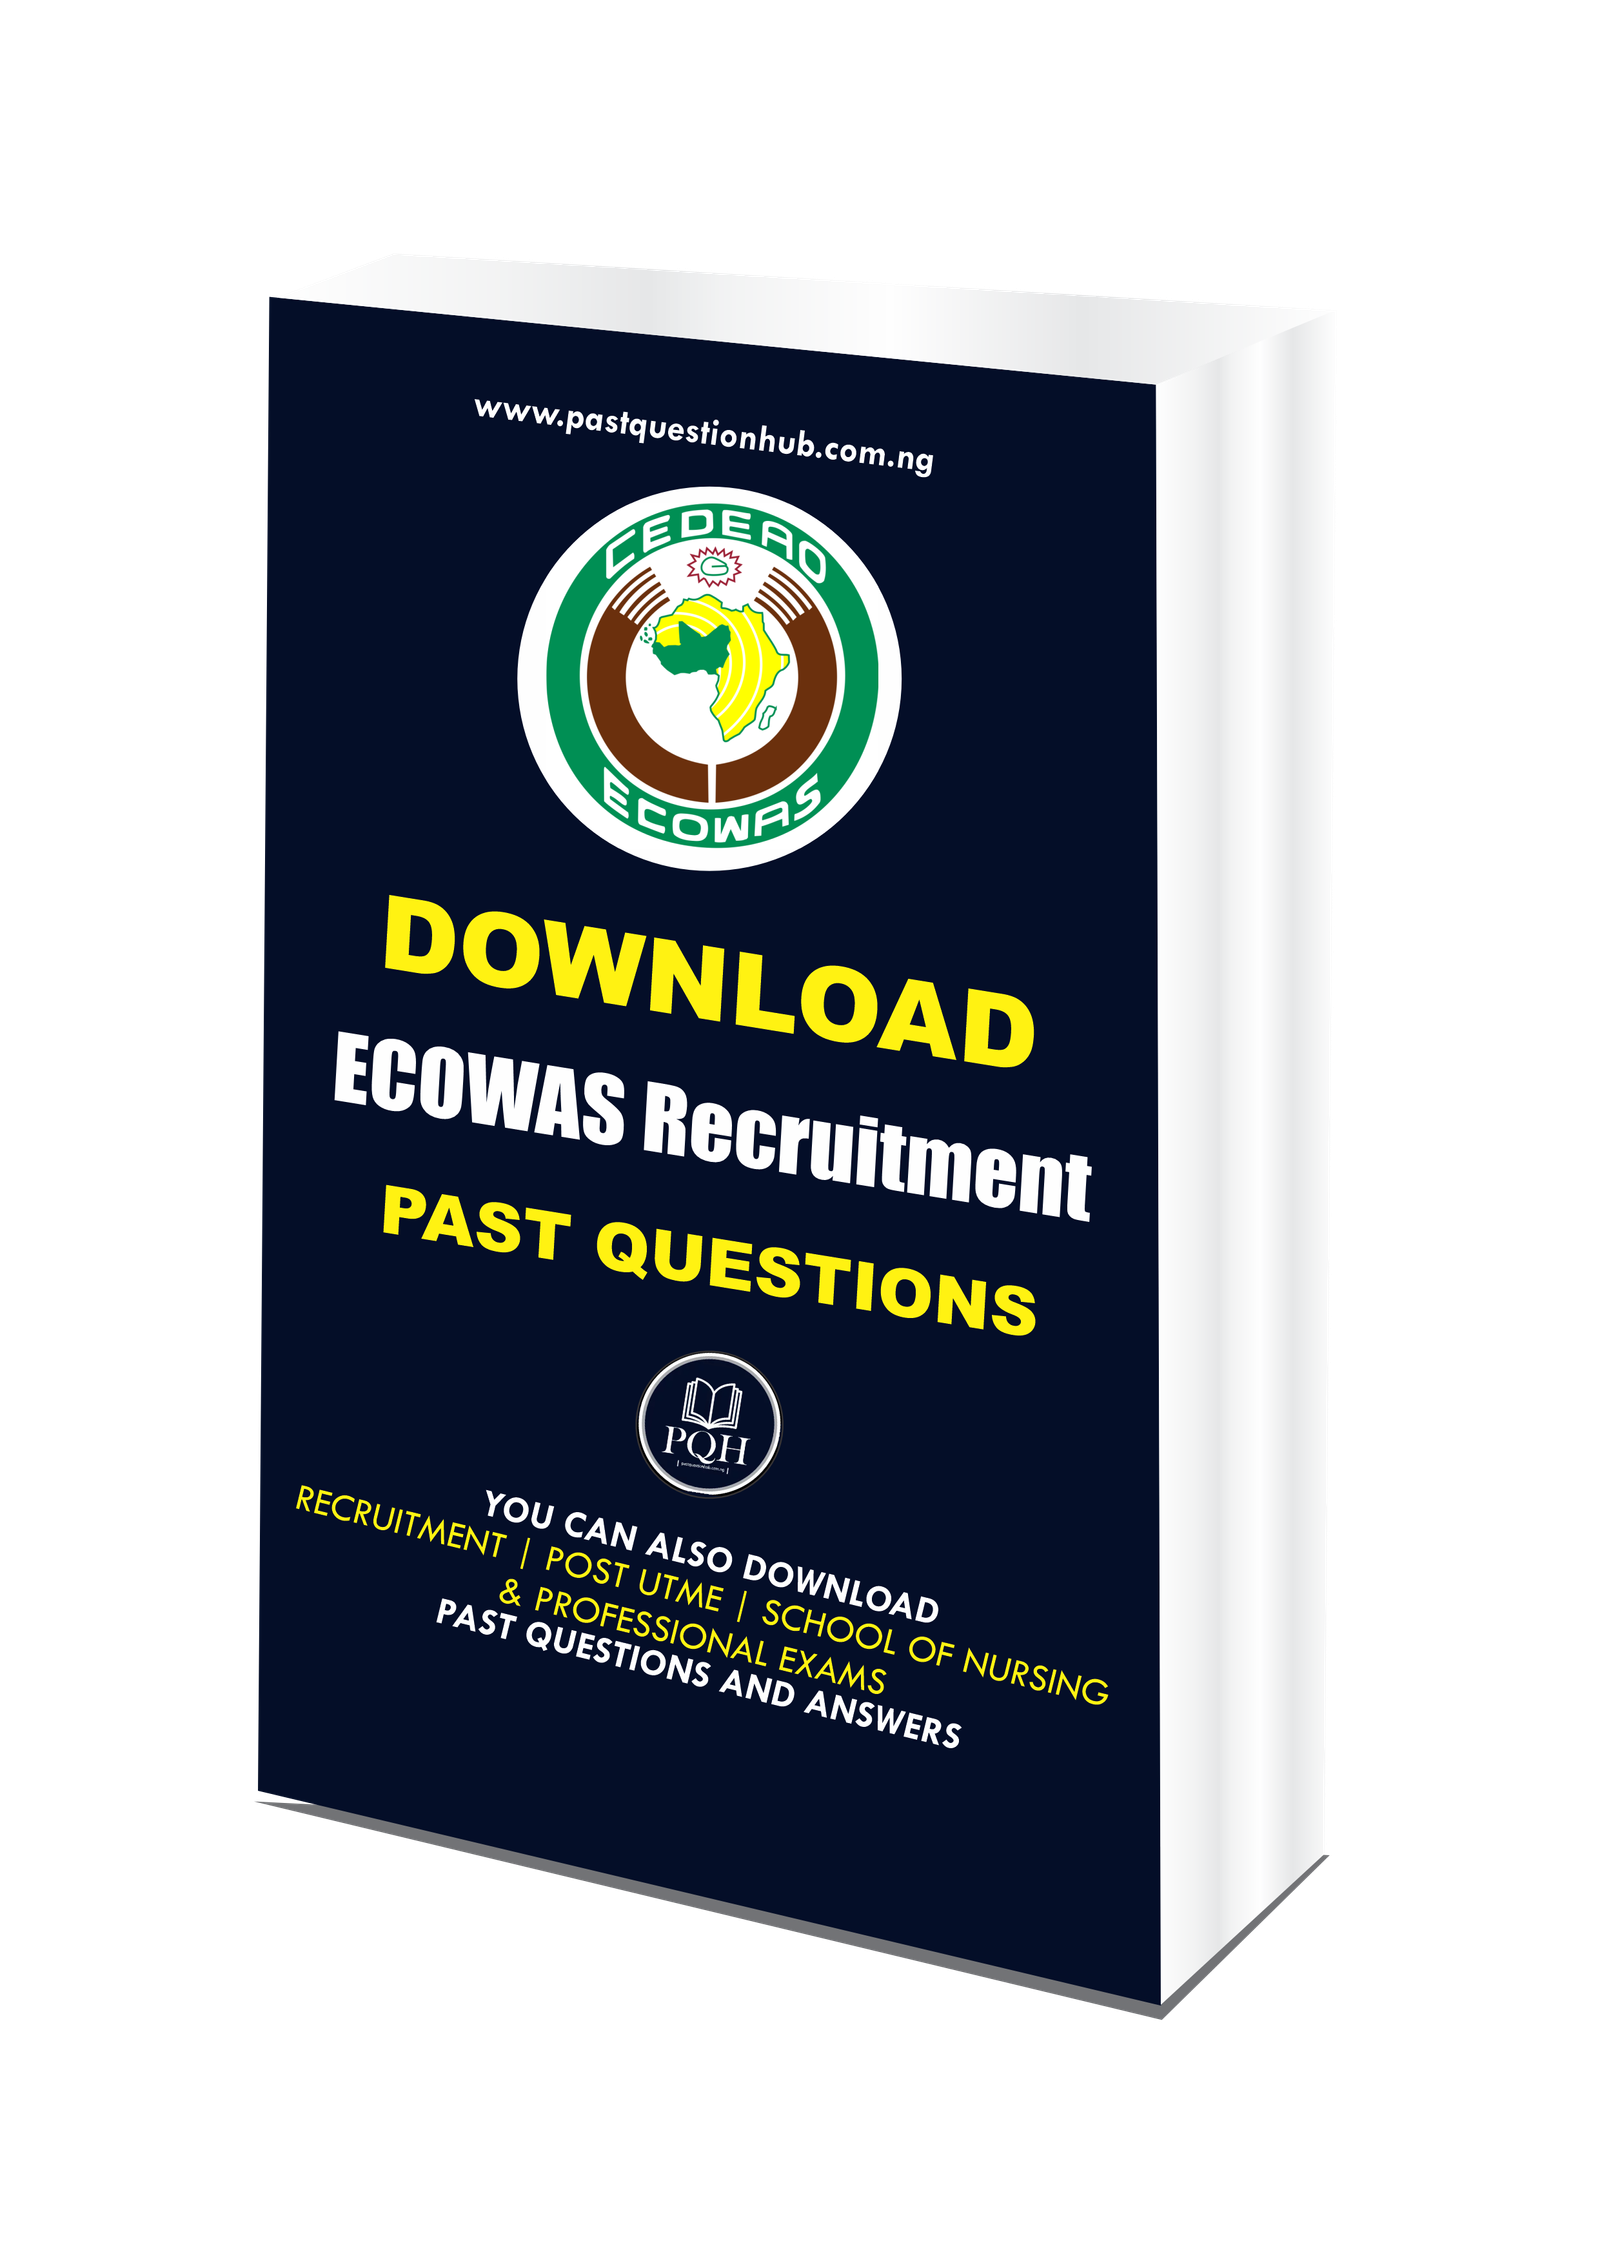 ECOWAS Past Questions and Answers Pdf – Download Here